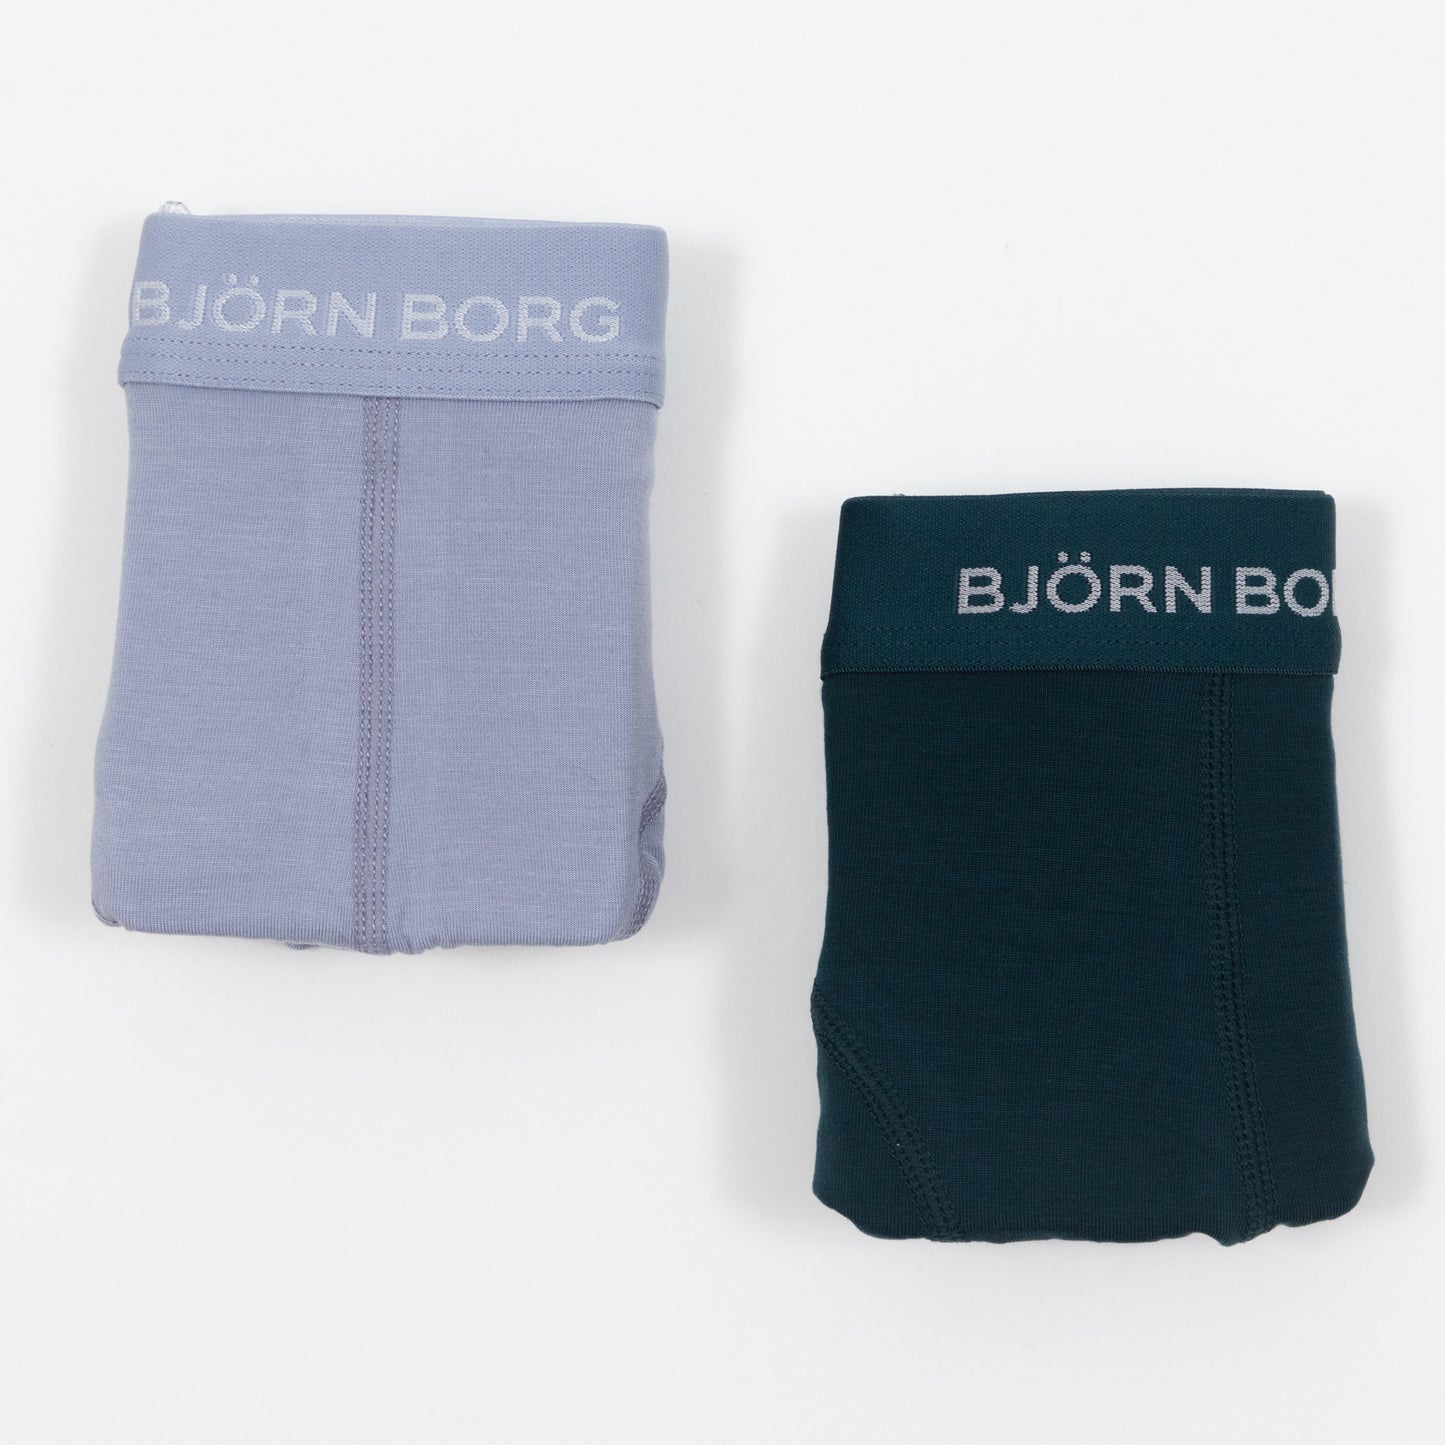 BJORN BORG 2 Pack Trunk Boxers in BLUE